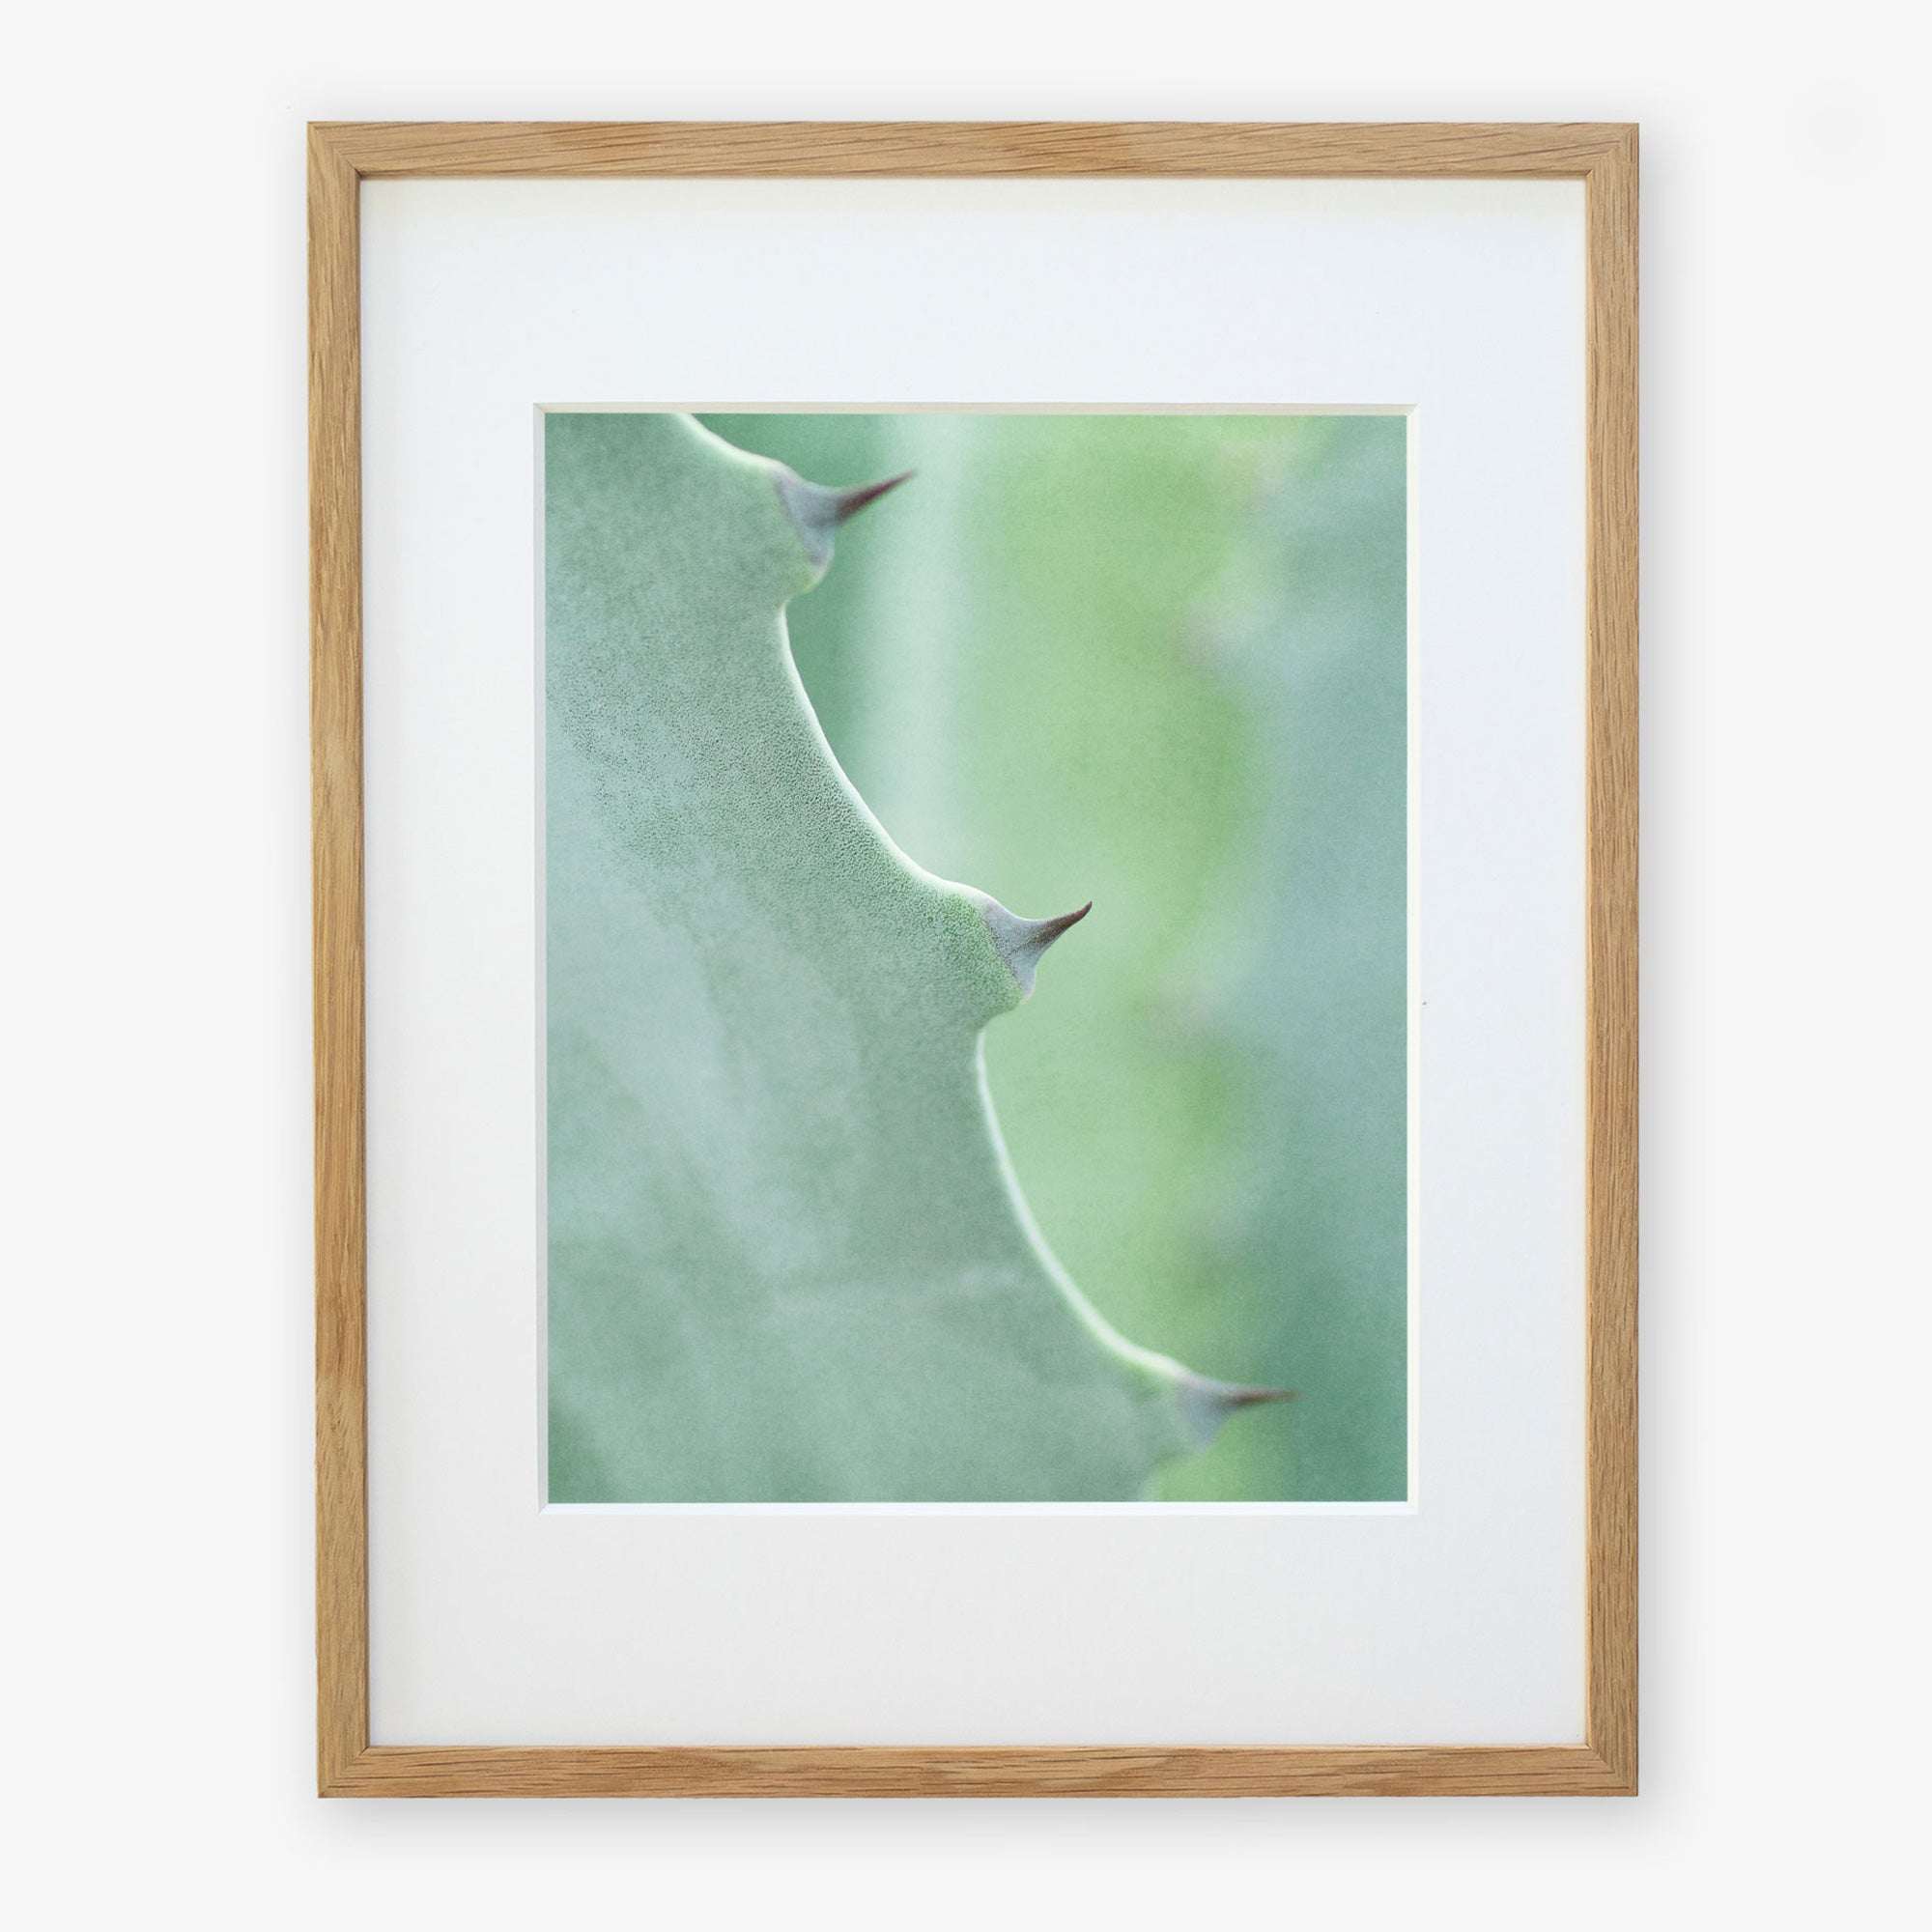 A close-up photo of an Offley Green 'Aloe Vera Spikes II' print, focusing on its green surface and sharp thorns, printed on archival photographic paper against a white background.